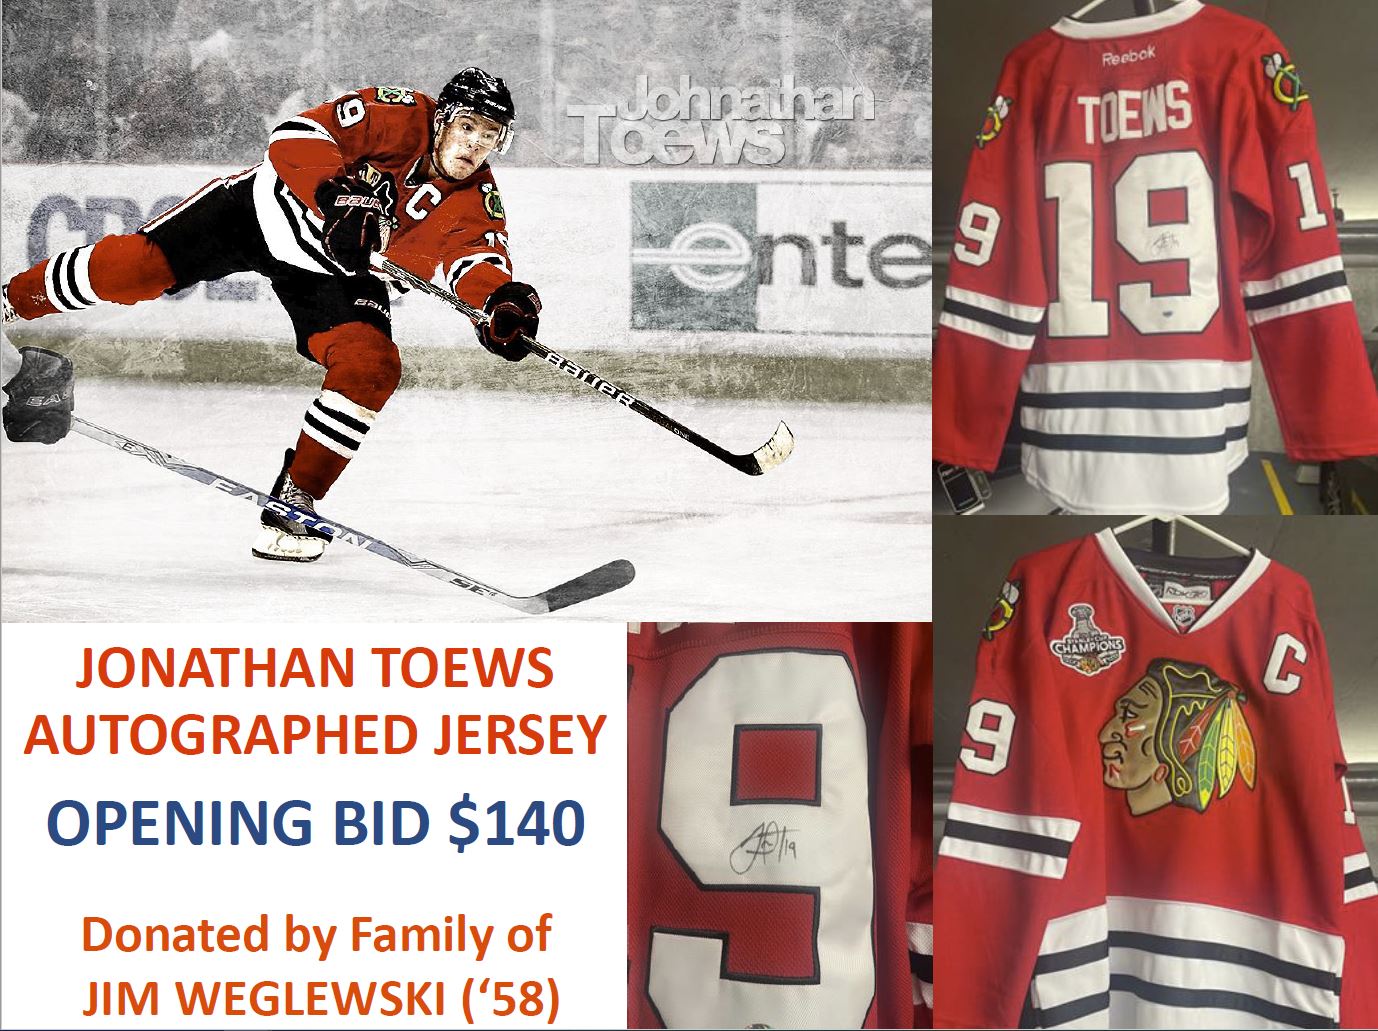 Featured image for “JONATHAN TOEWS AUTOGRAPHED JERSEY”